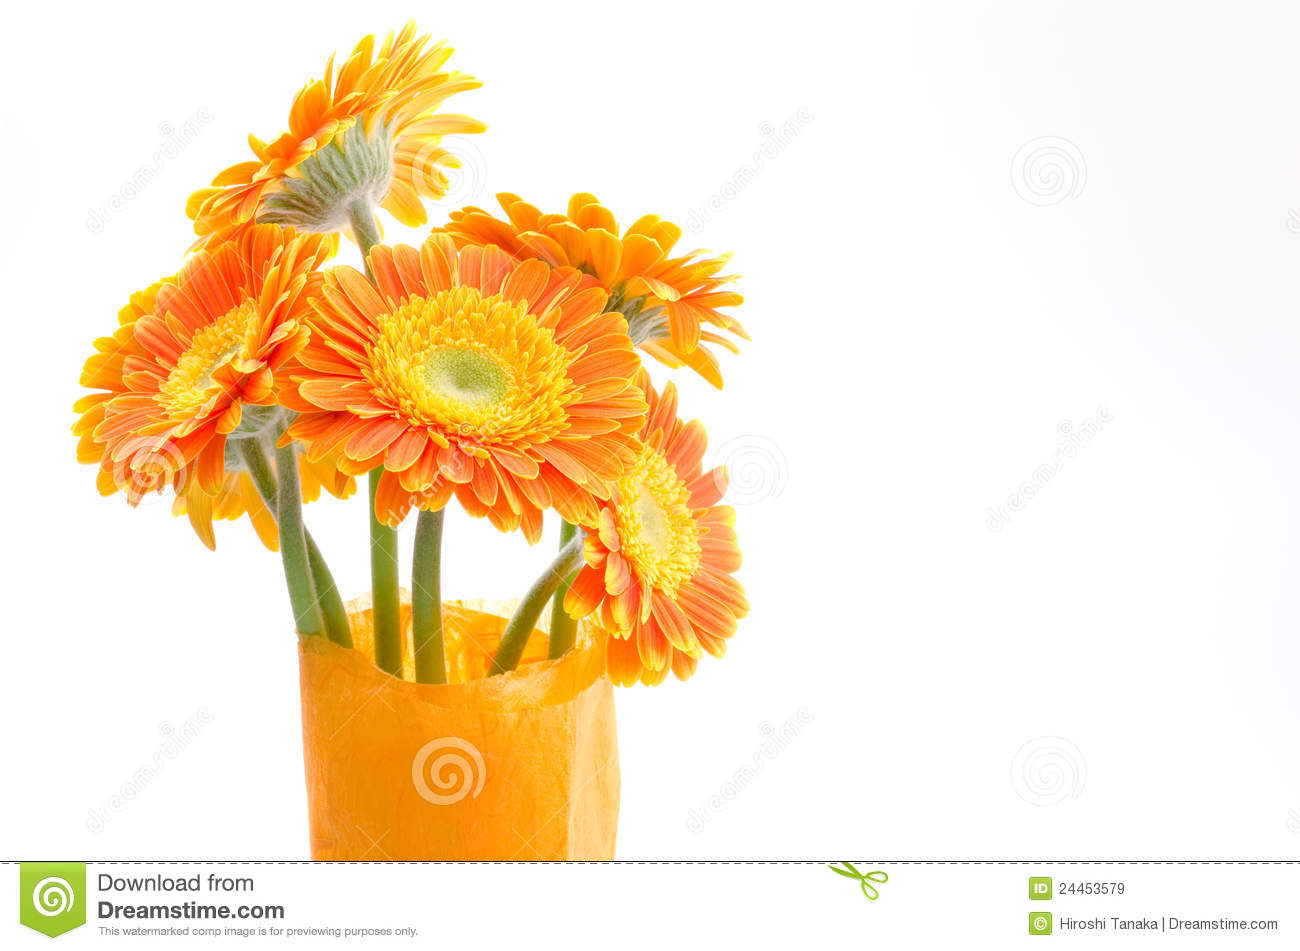 African Daisy Bouquet Royalty Free Stock Images   Image  24453579